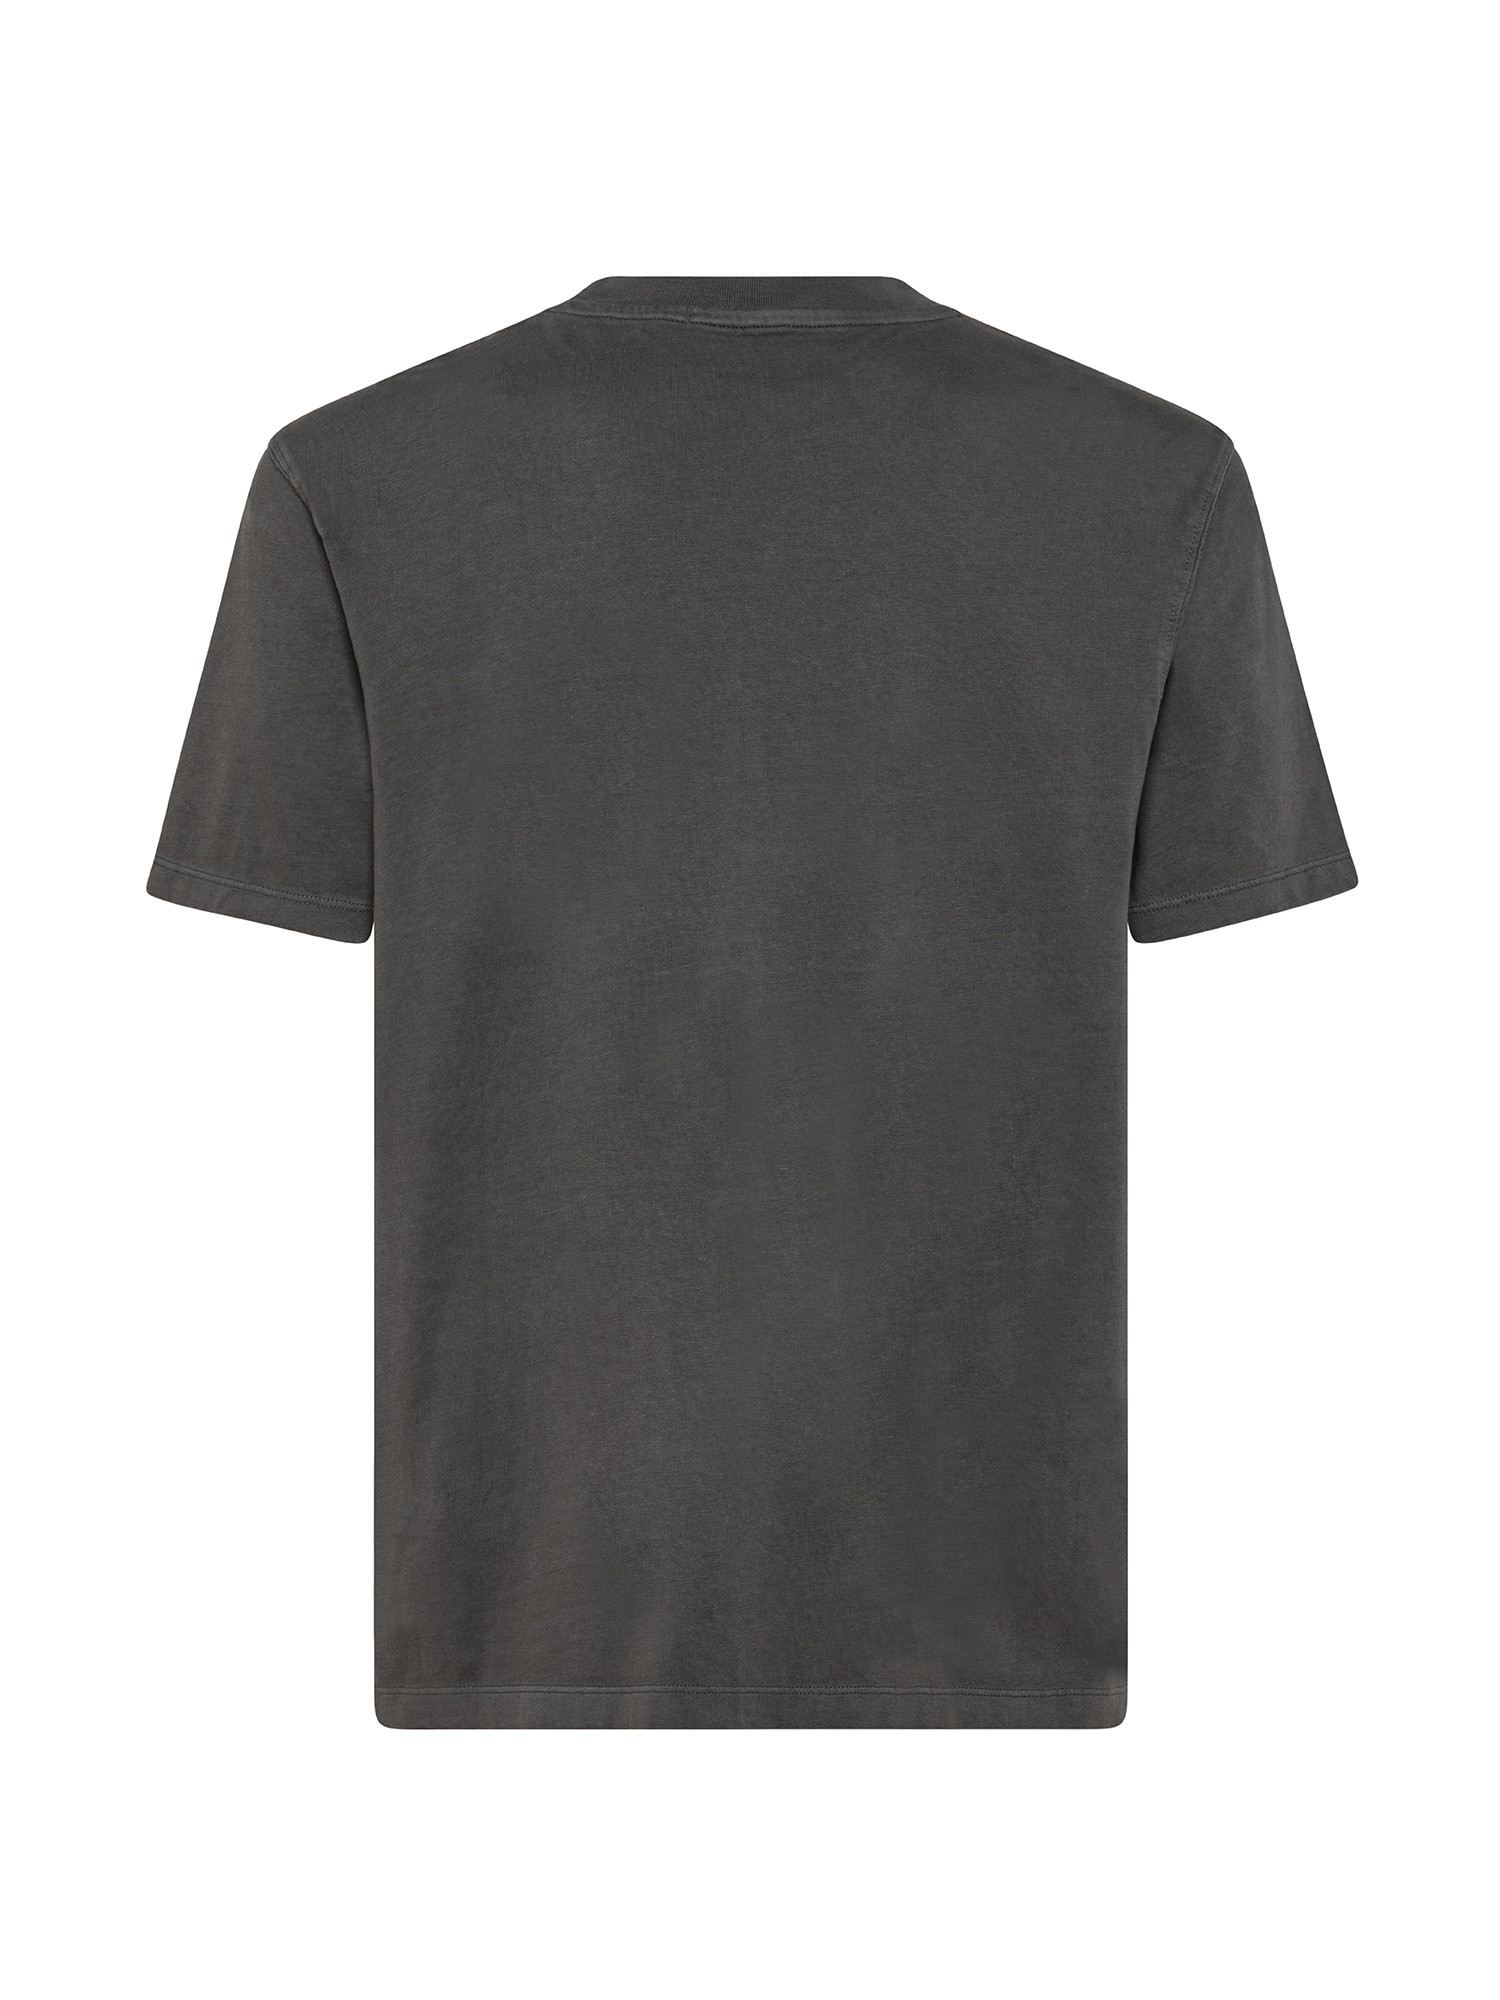 T-shirt con logo in cotone, Grigio, large image number 1